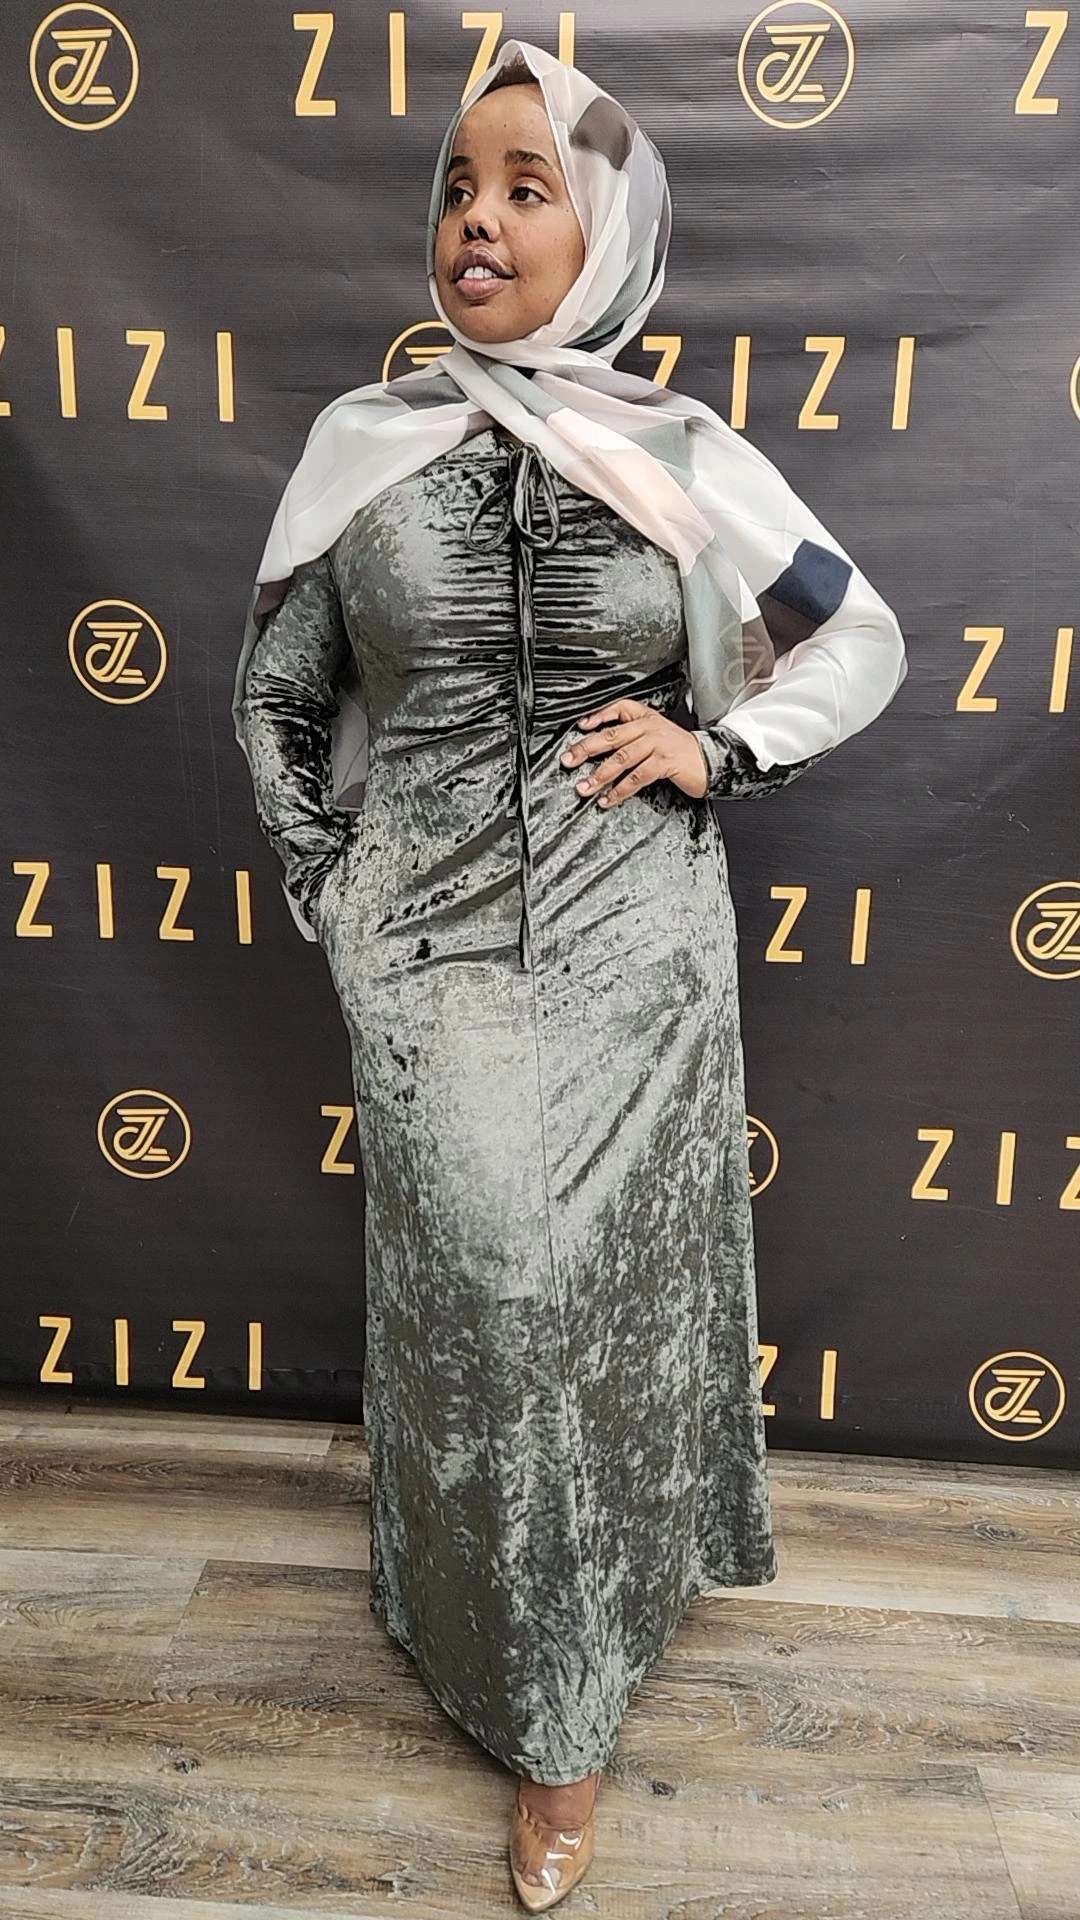 Velvet Evening Dress in a solid mint color available at ZIZI Boutique 